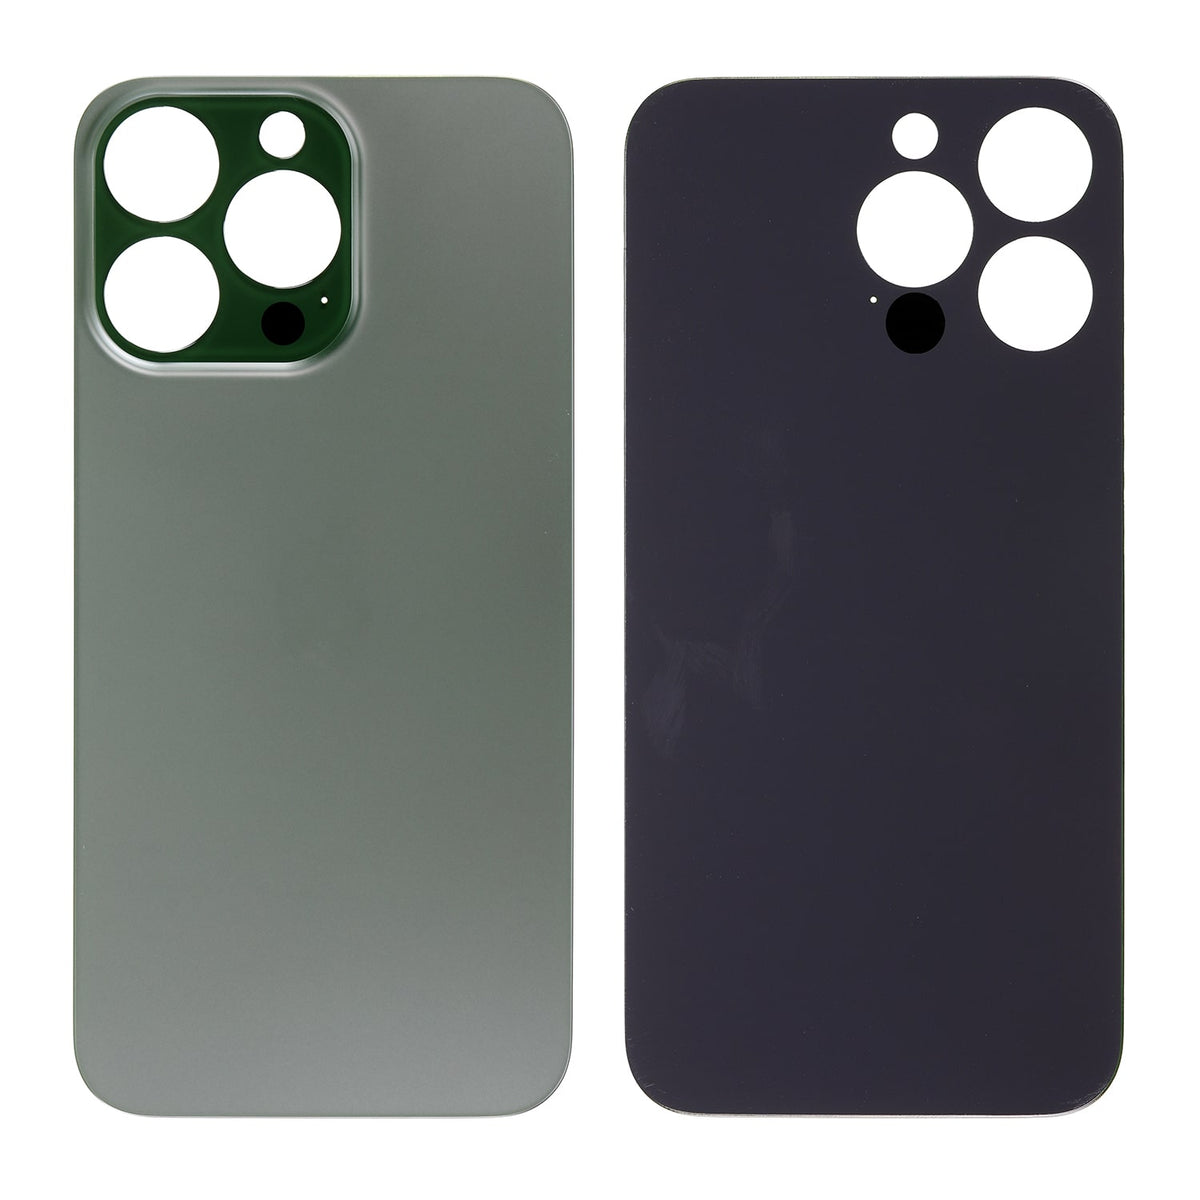 ALPINE GREEN BACK COVER GLASS FOR IPHONE 13 PRO